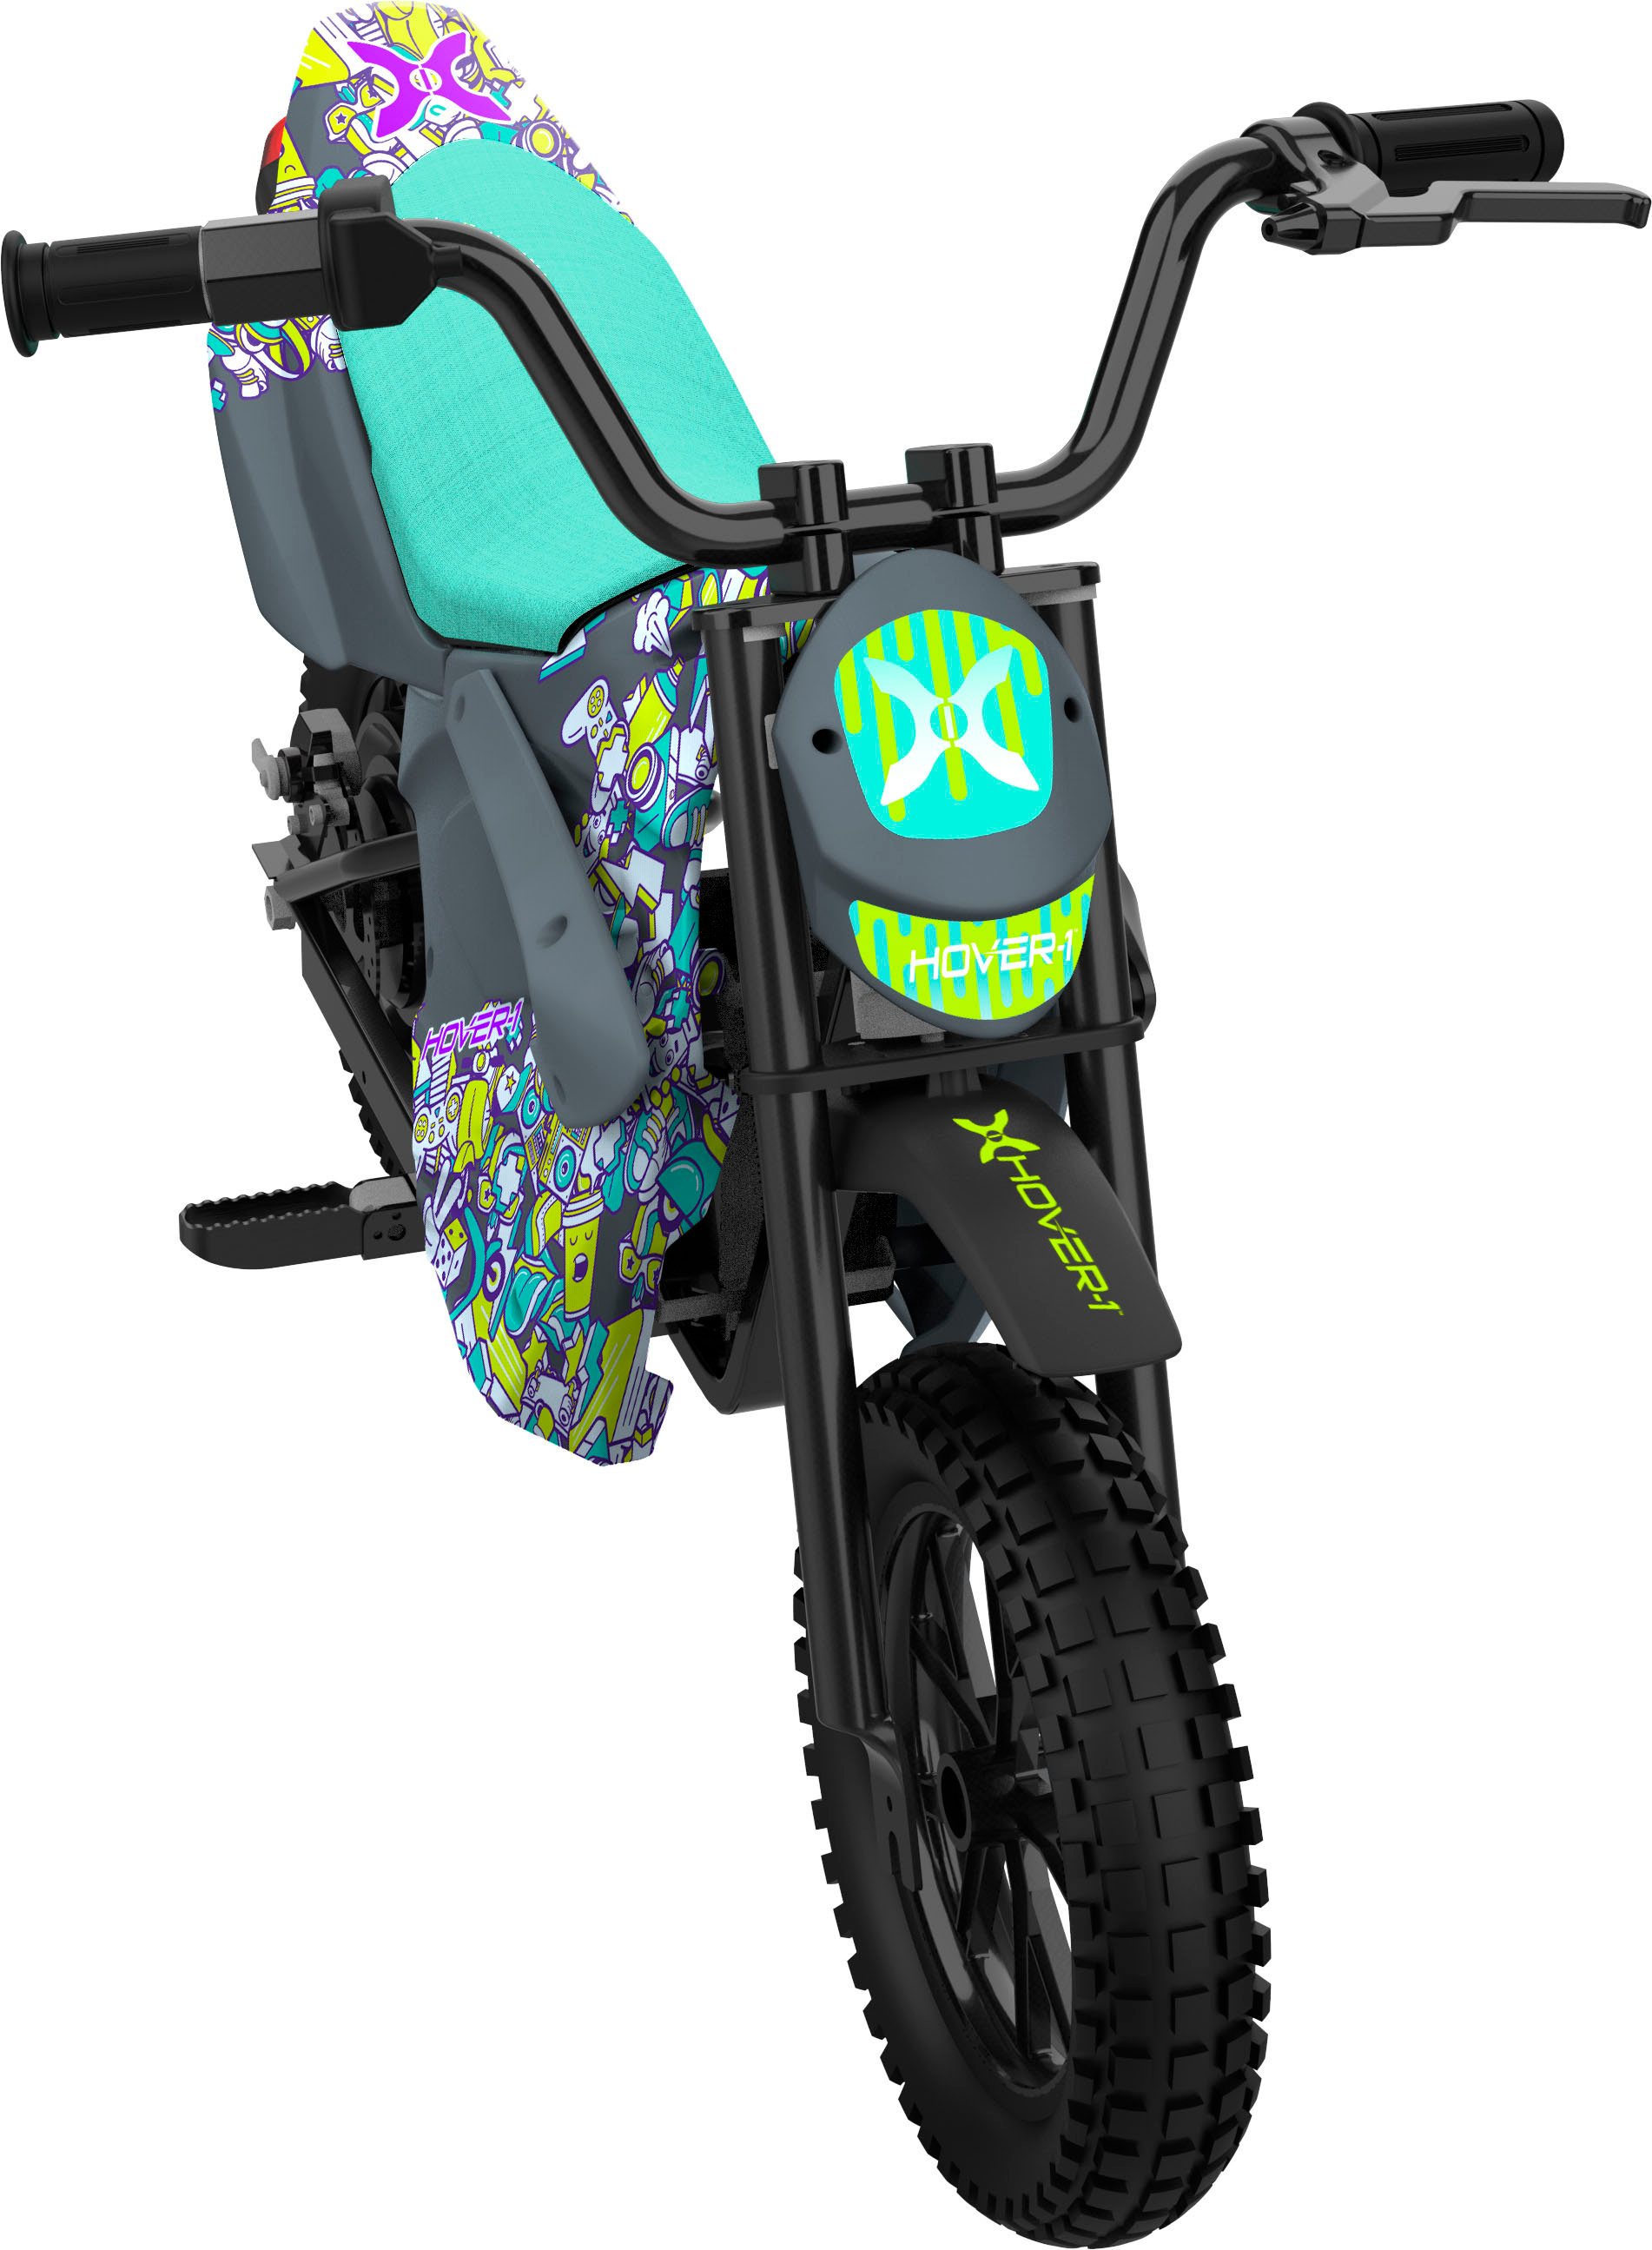 Left View: Hover-1 - Trak Electric Dirt Bike for Kids, Silent-chainless motor, Lithium-ion Battery, 9 mi Range, 9 mph Max Speed - Black